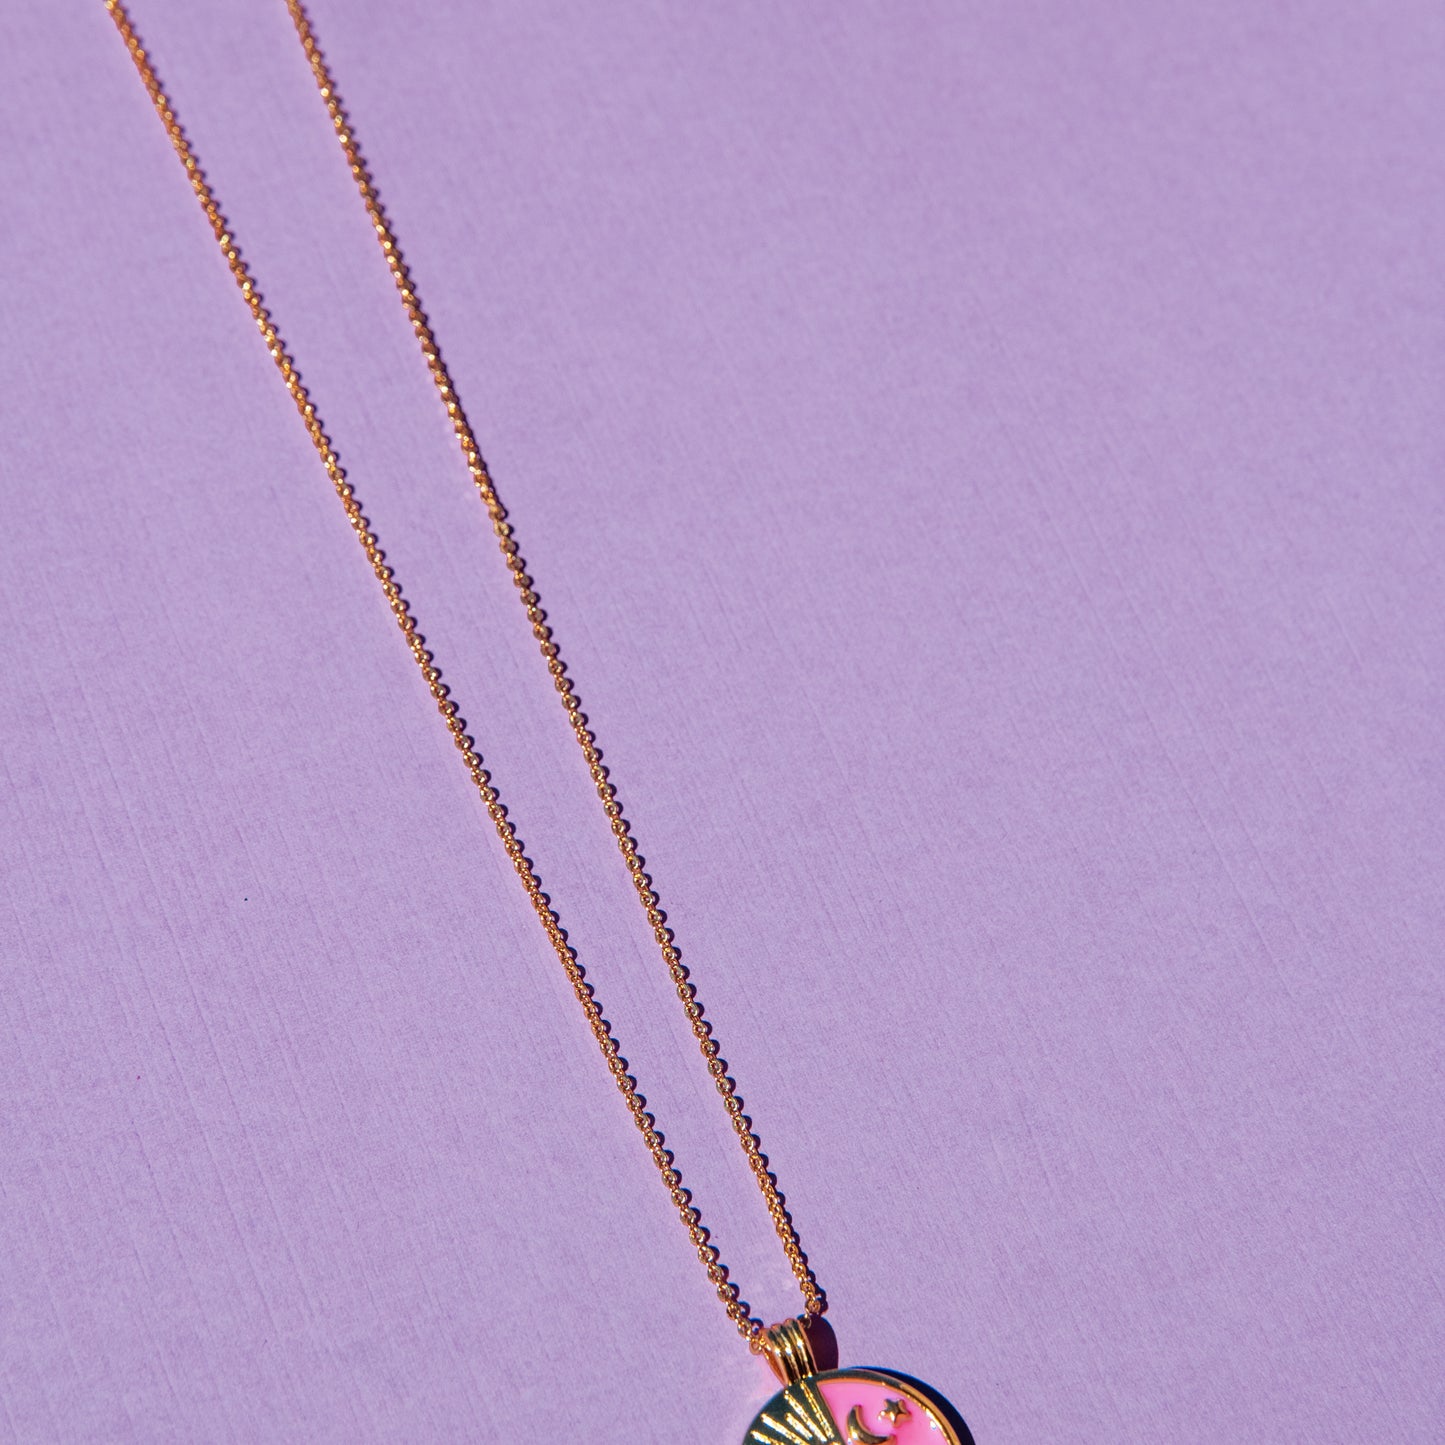 Space Girl Necklace